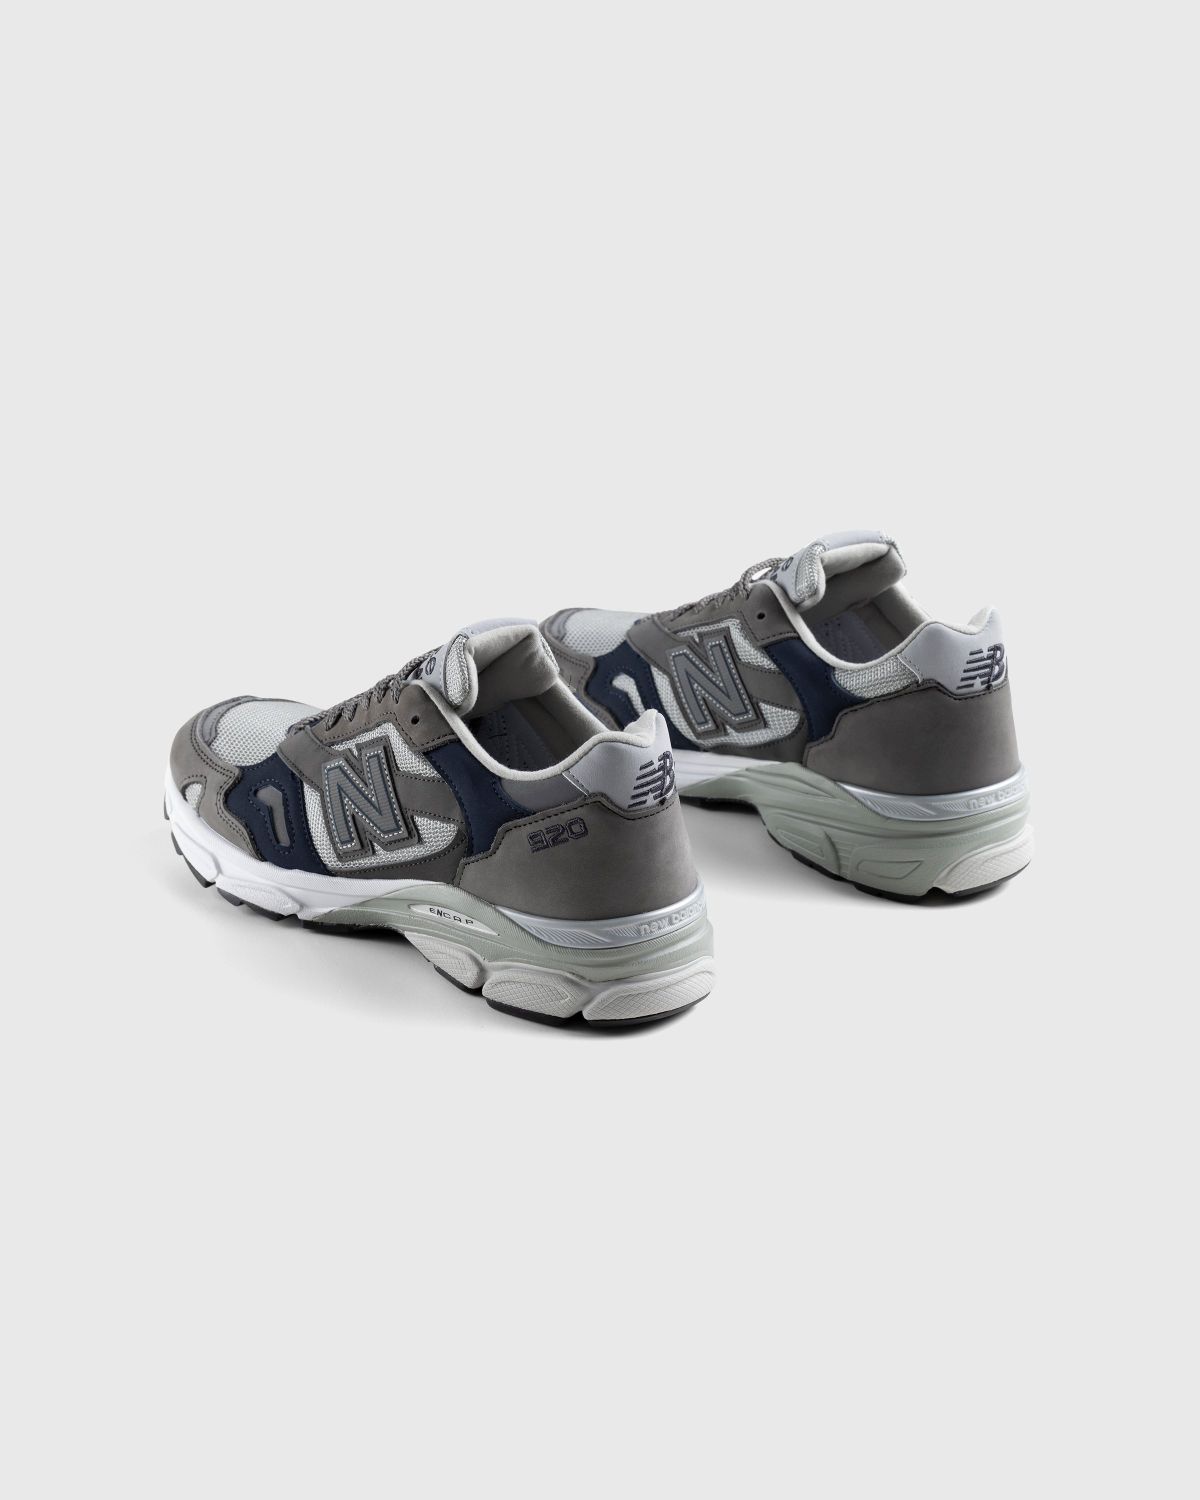 New Balance – M920GNS Grey/Navy - Low Top Sneakers - Grey - Image 4